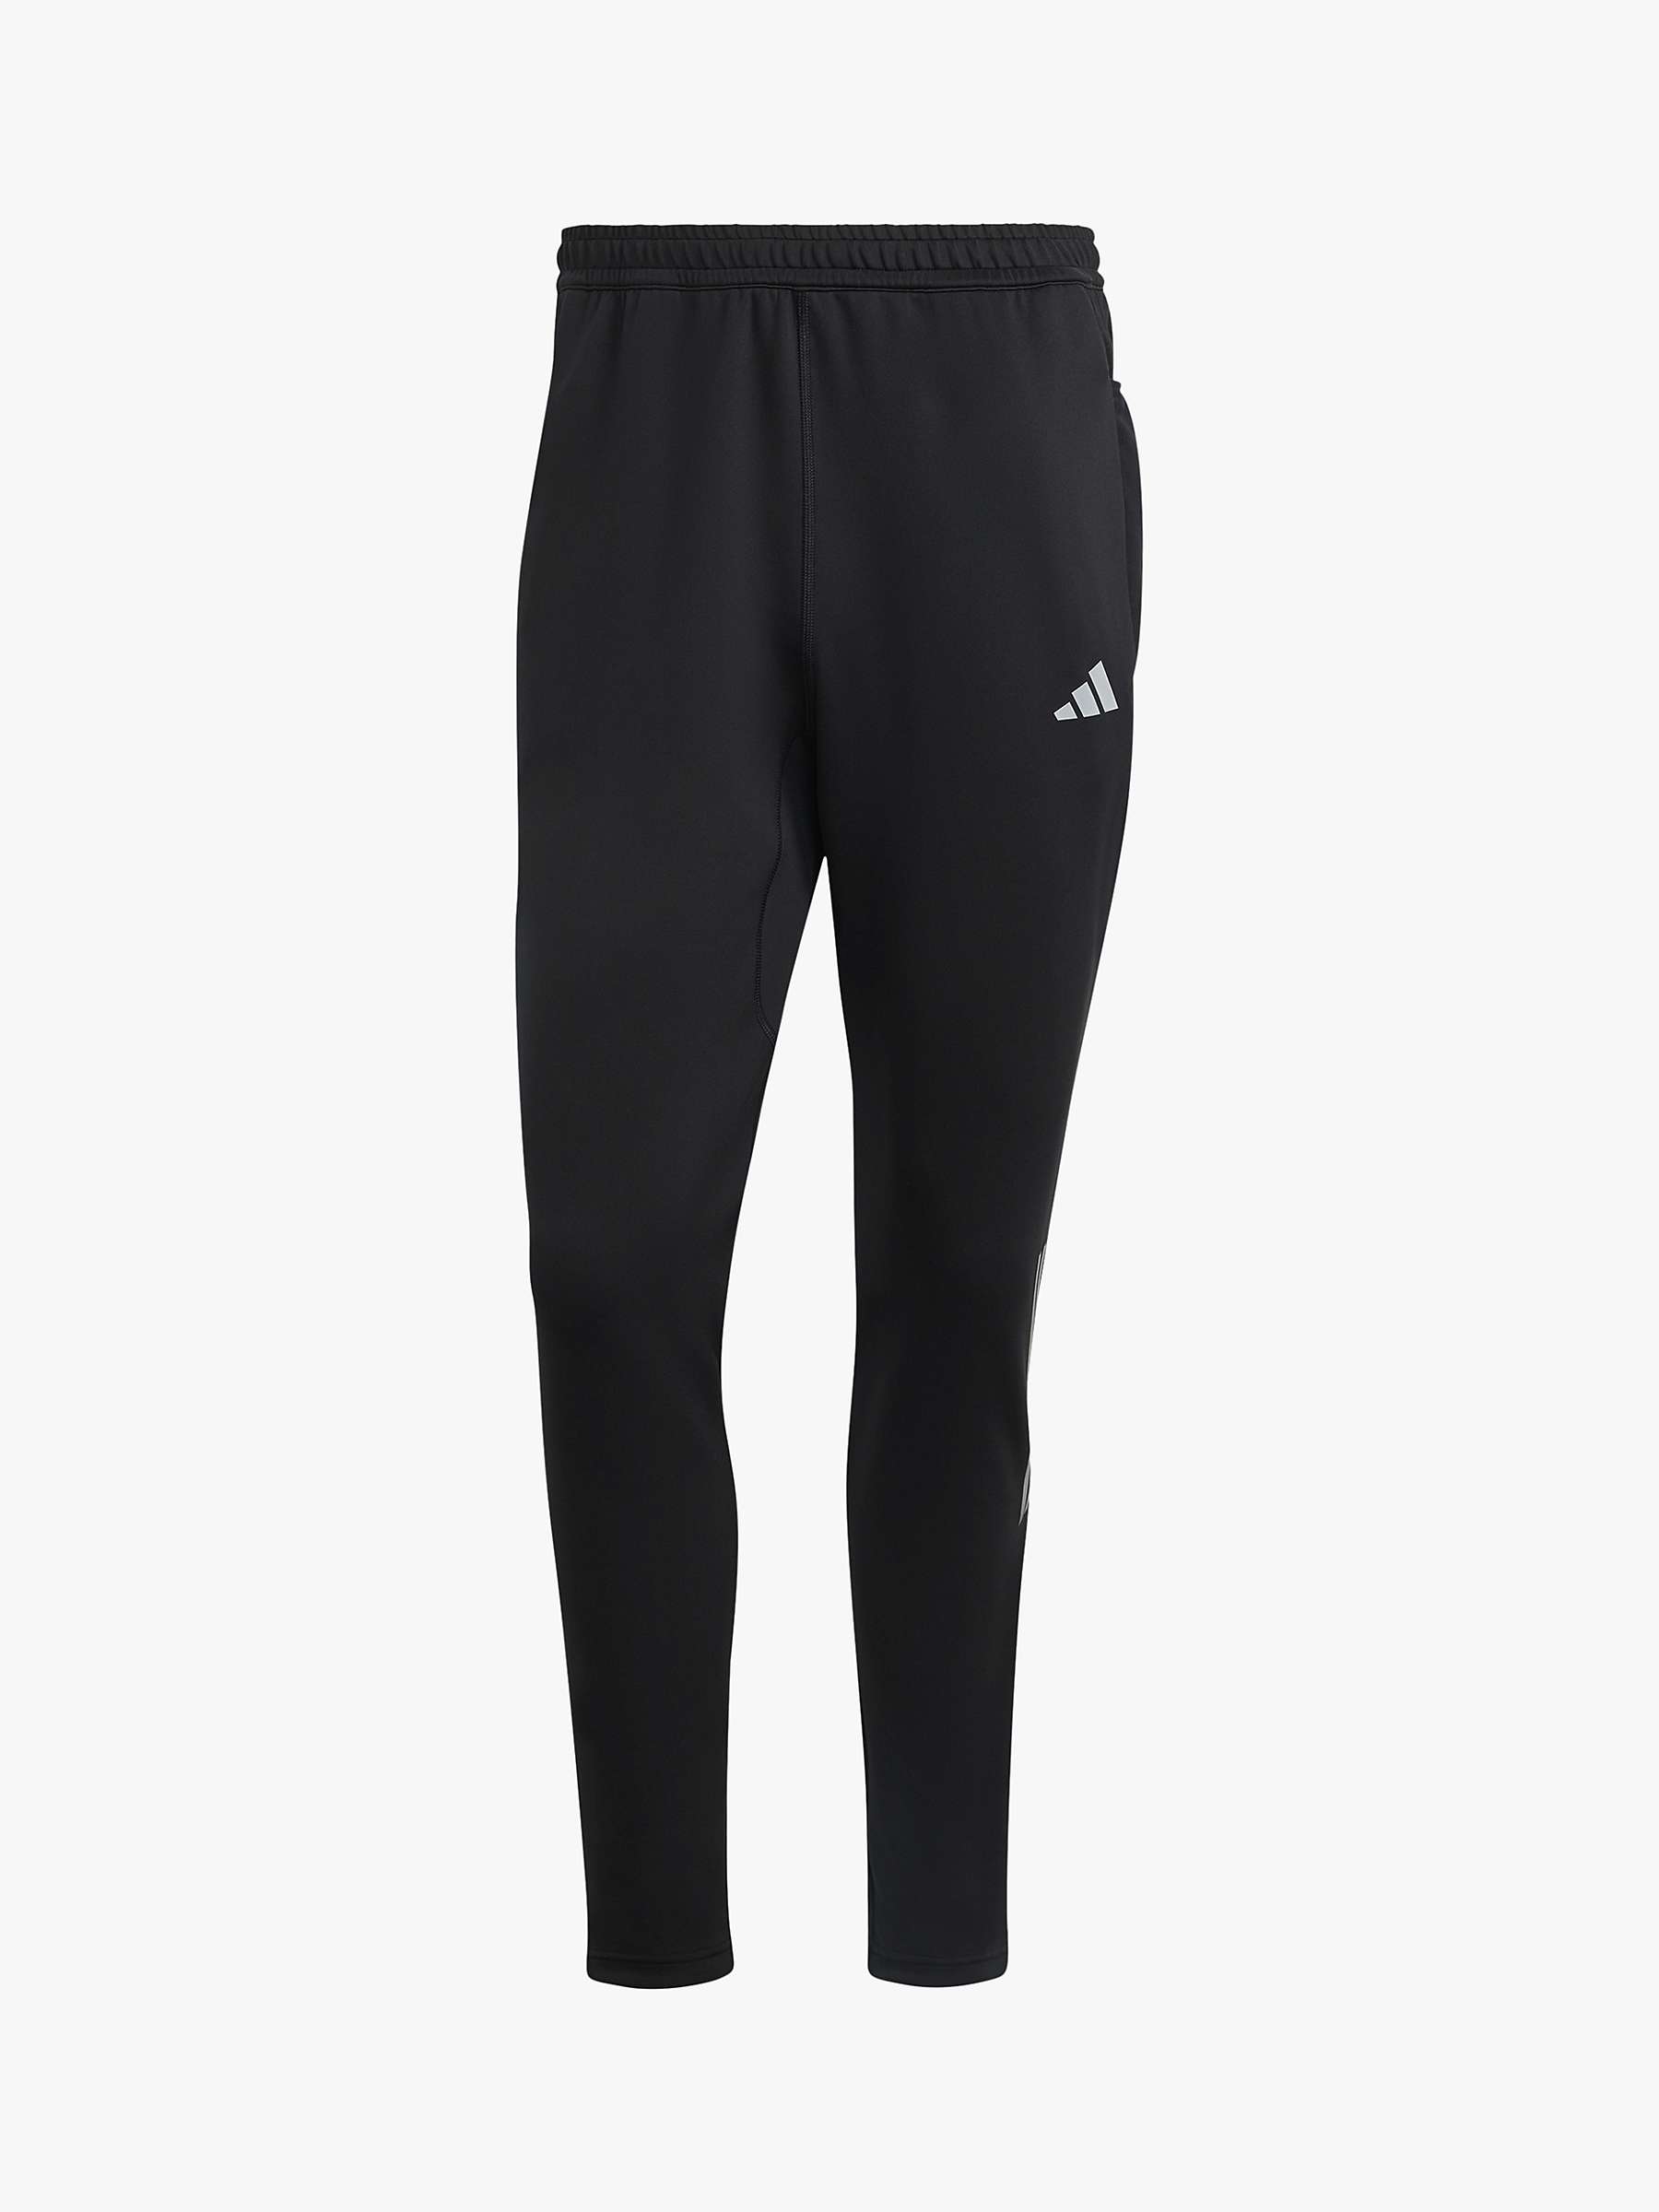 Buy adidas Own The Run Astro Joggers Online at johnlewis.com